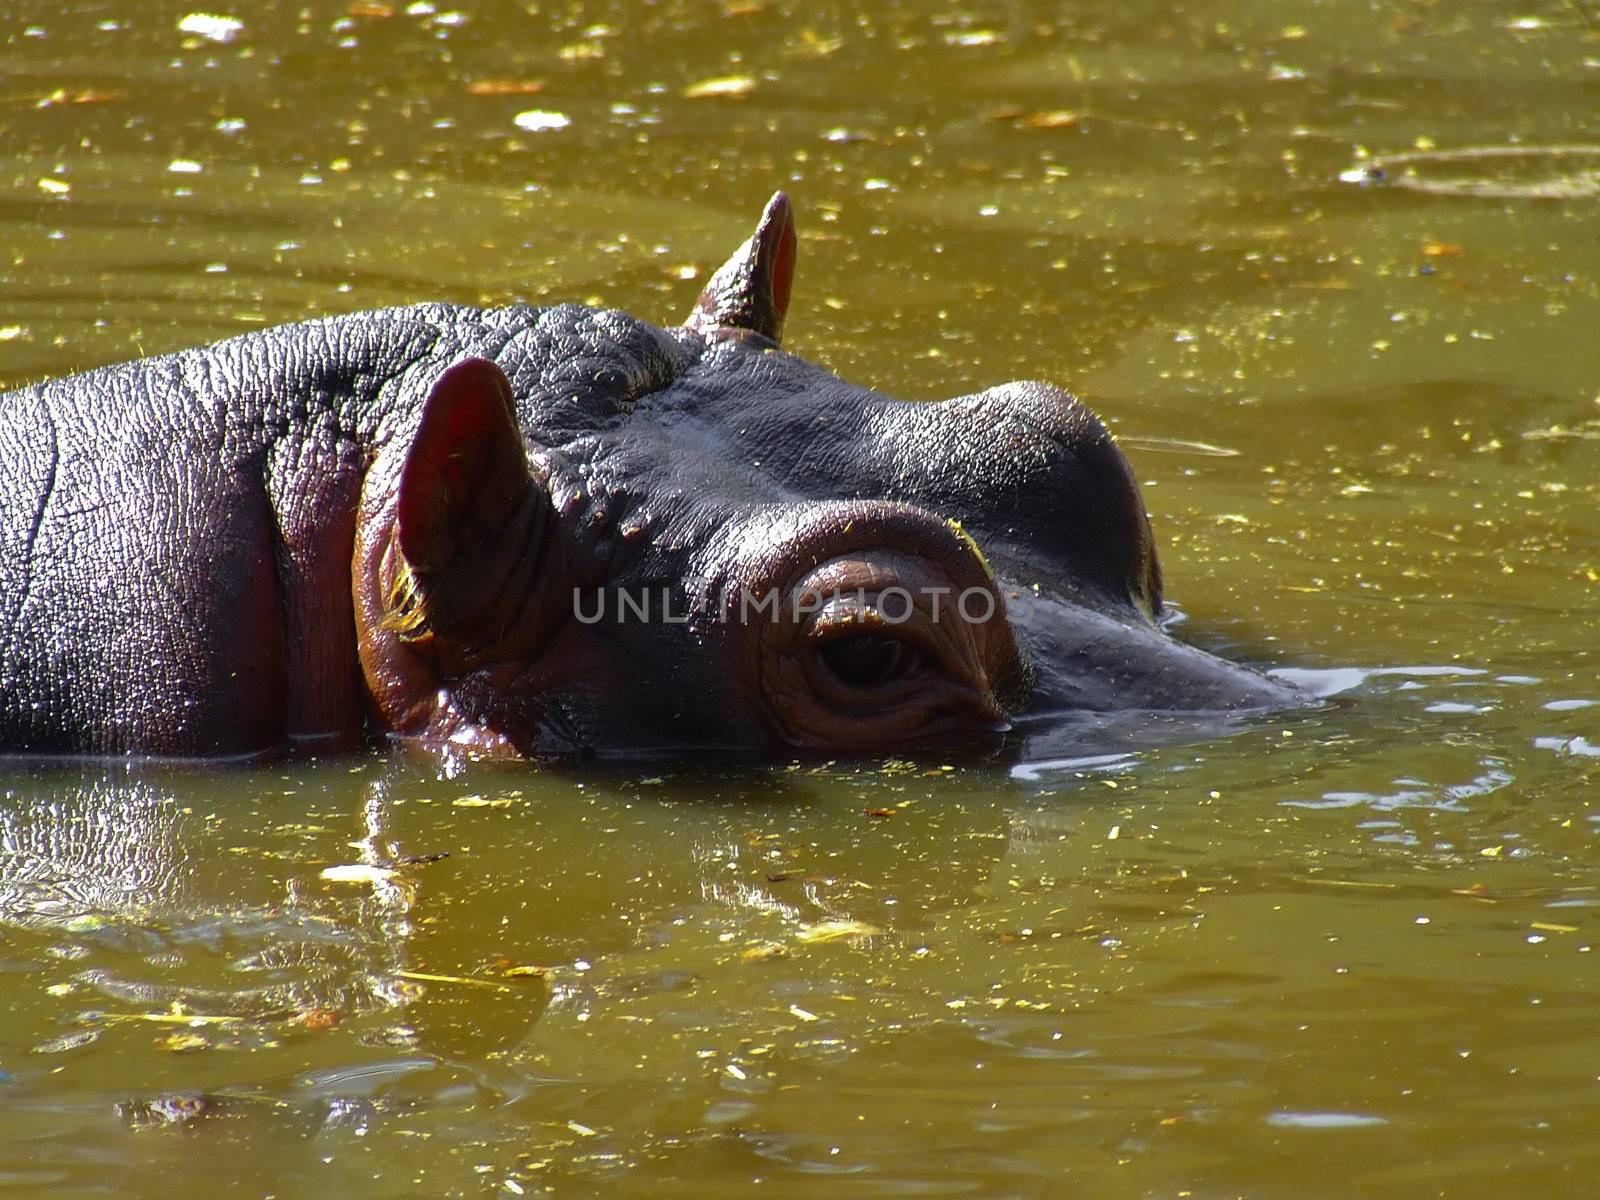 Close up on a hippo into the water